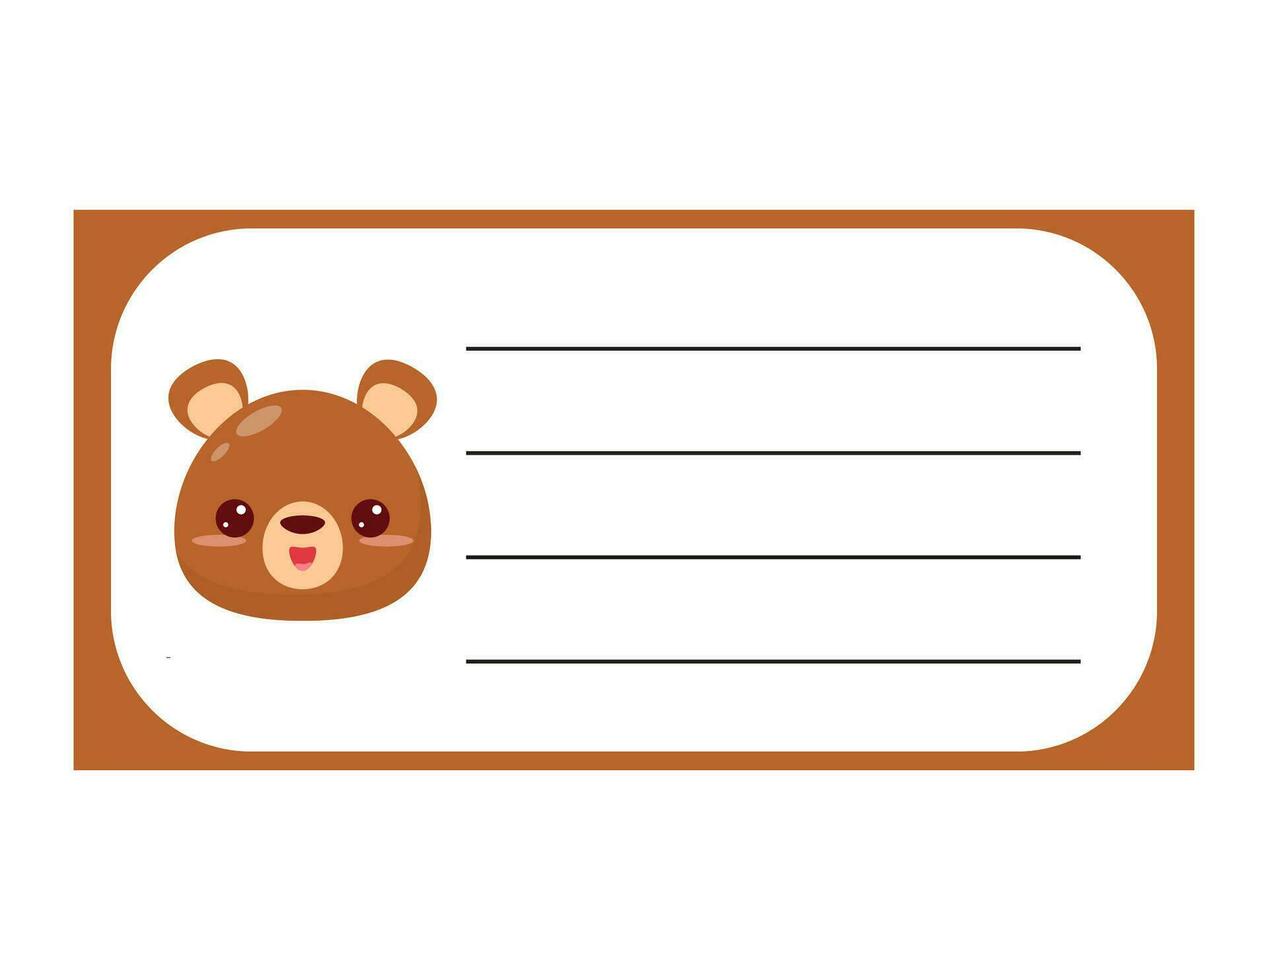 Design of the pages of the weekly and daily children's planner. Cute teddy bear. Checklist layout for diary, notepad vector